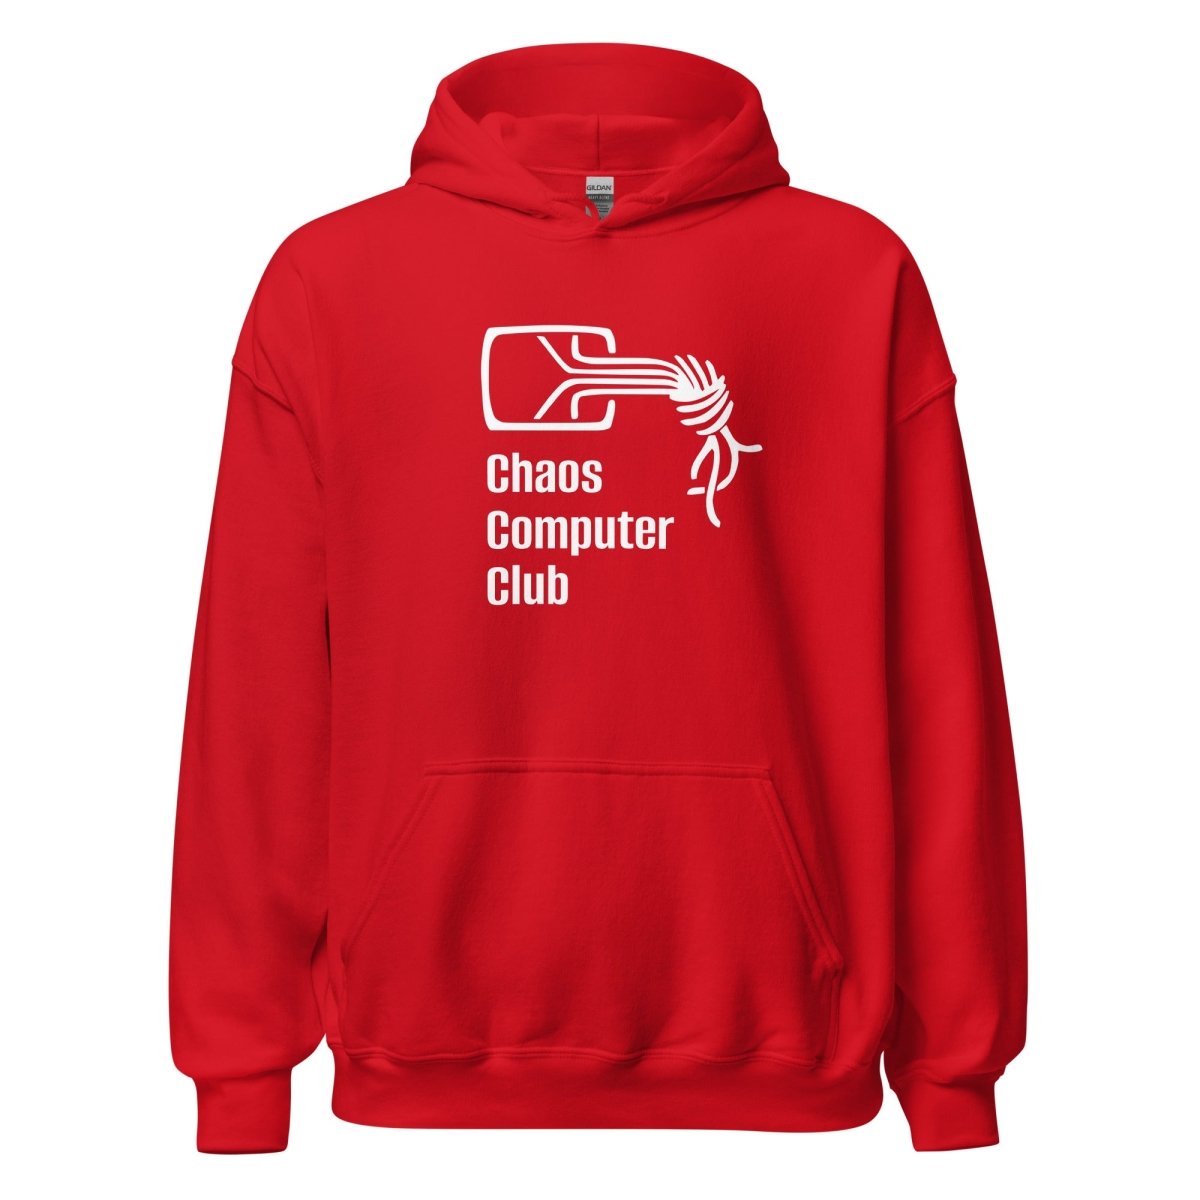 Chaos Computer Club Hoodie (unisex) - Red - AI Store